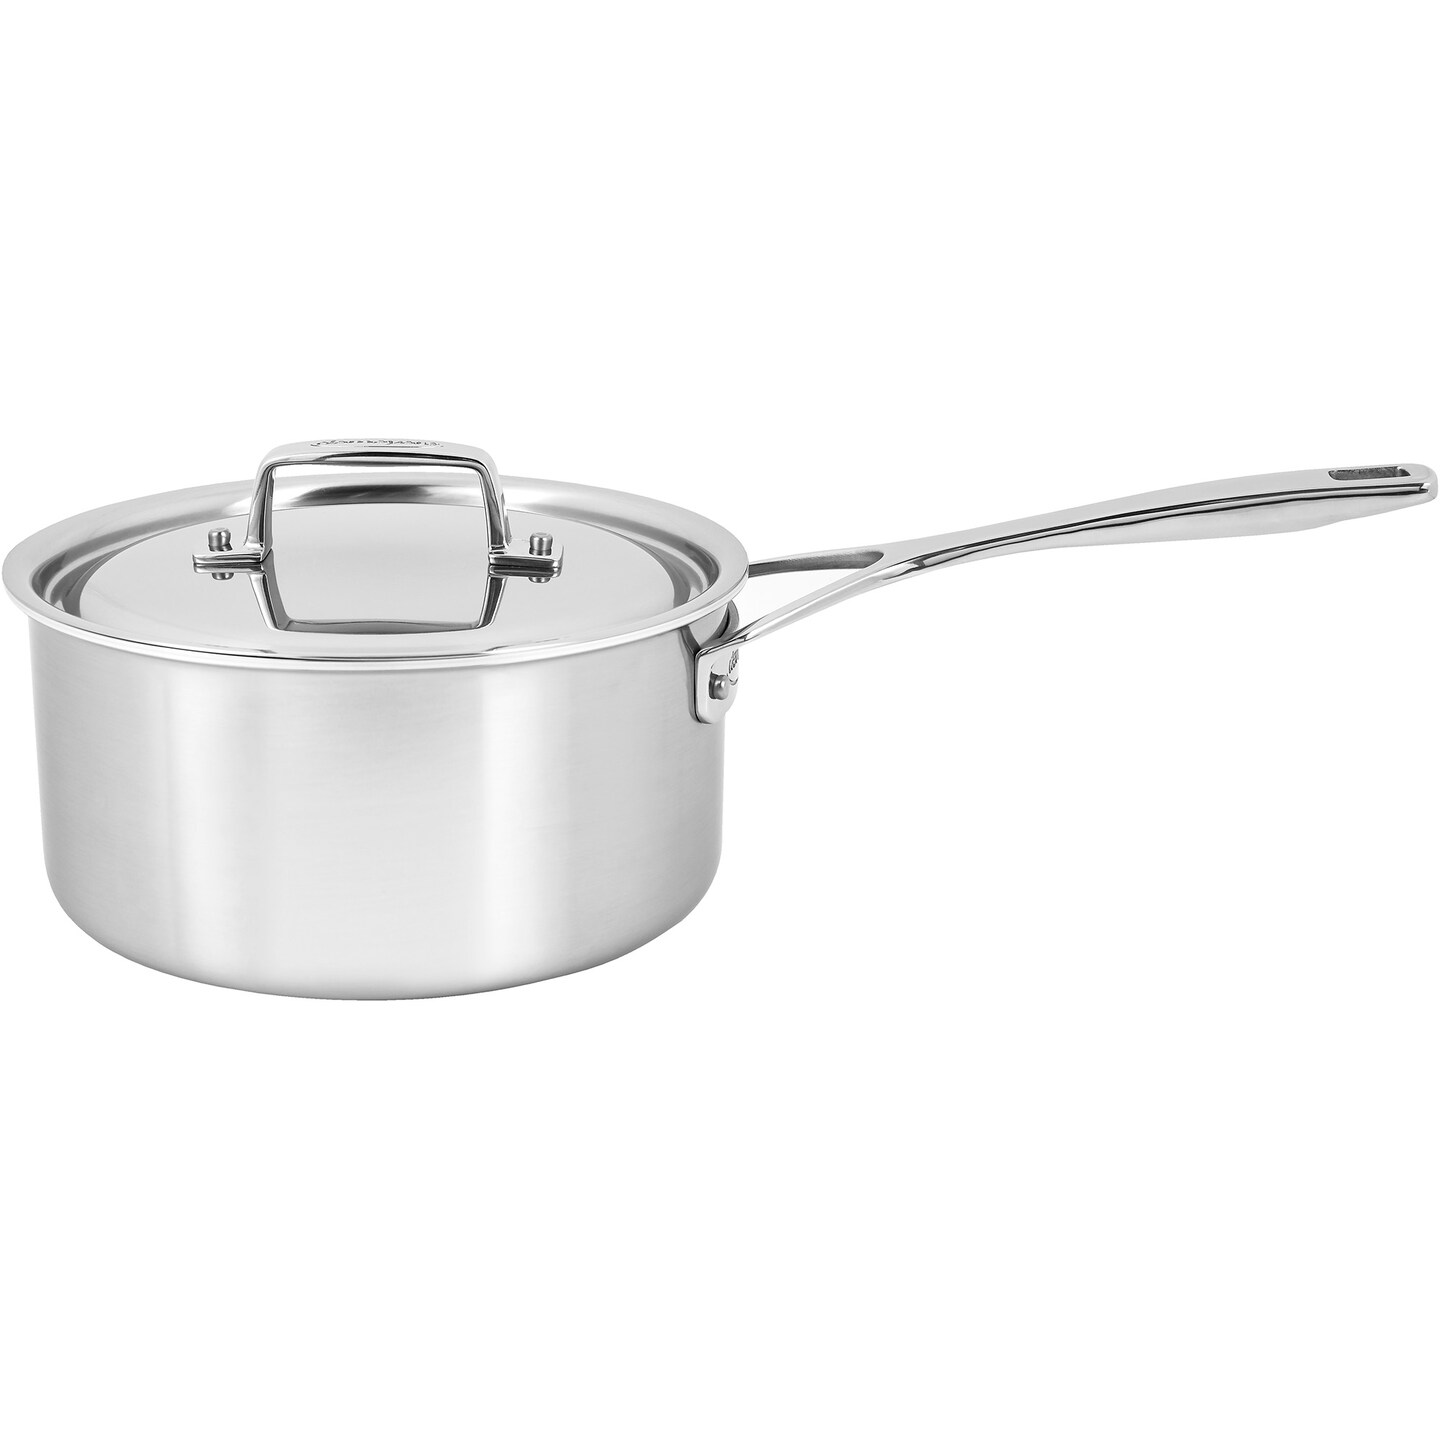 DEMEYERE Essential 5-ply Stainless Steel Saucepan with Lid